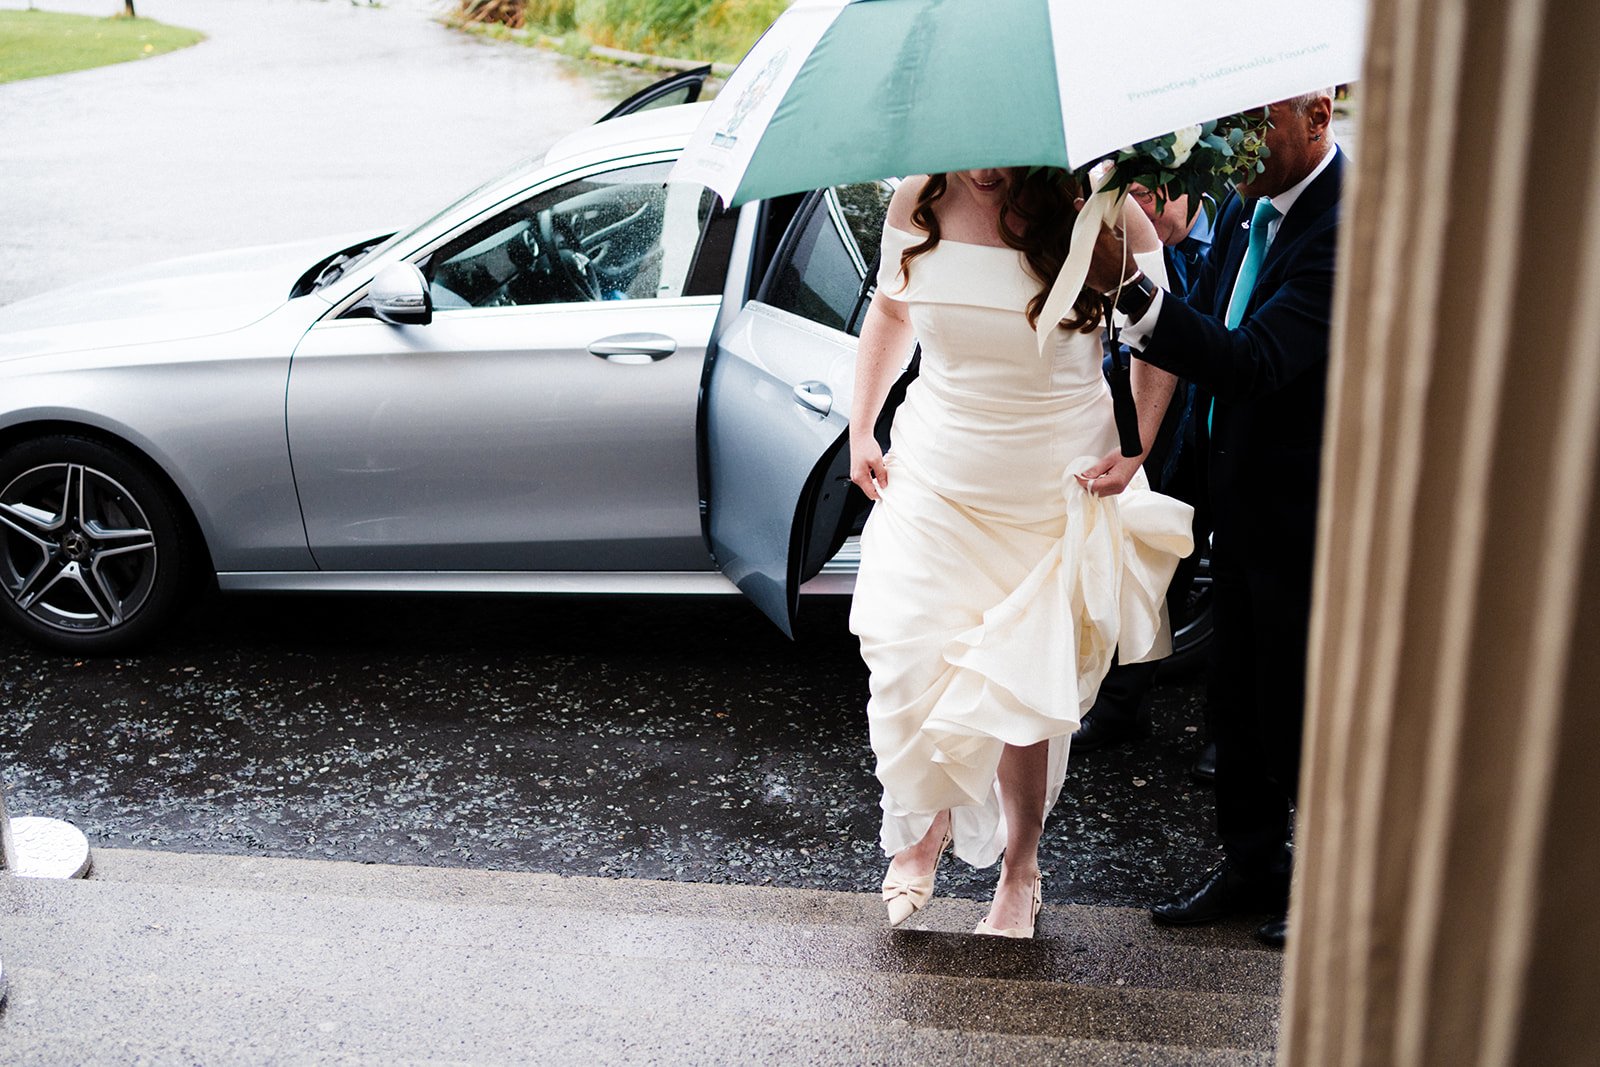 A bride walks under an umbrella up the steps at Wylam Brewery in Newcastle. Her face is partly obscured